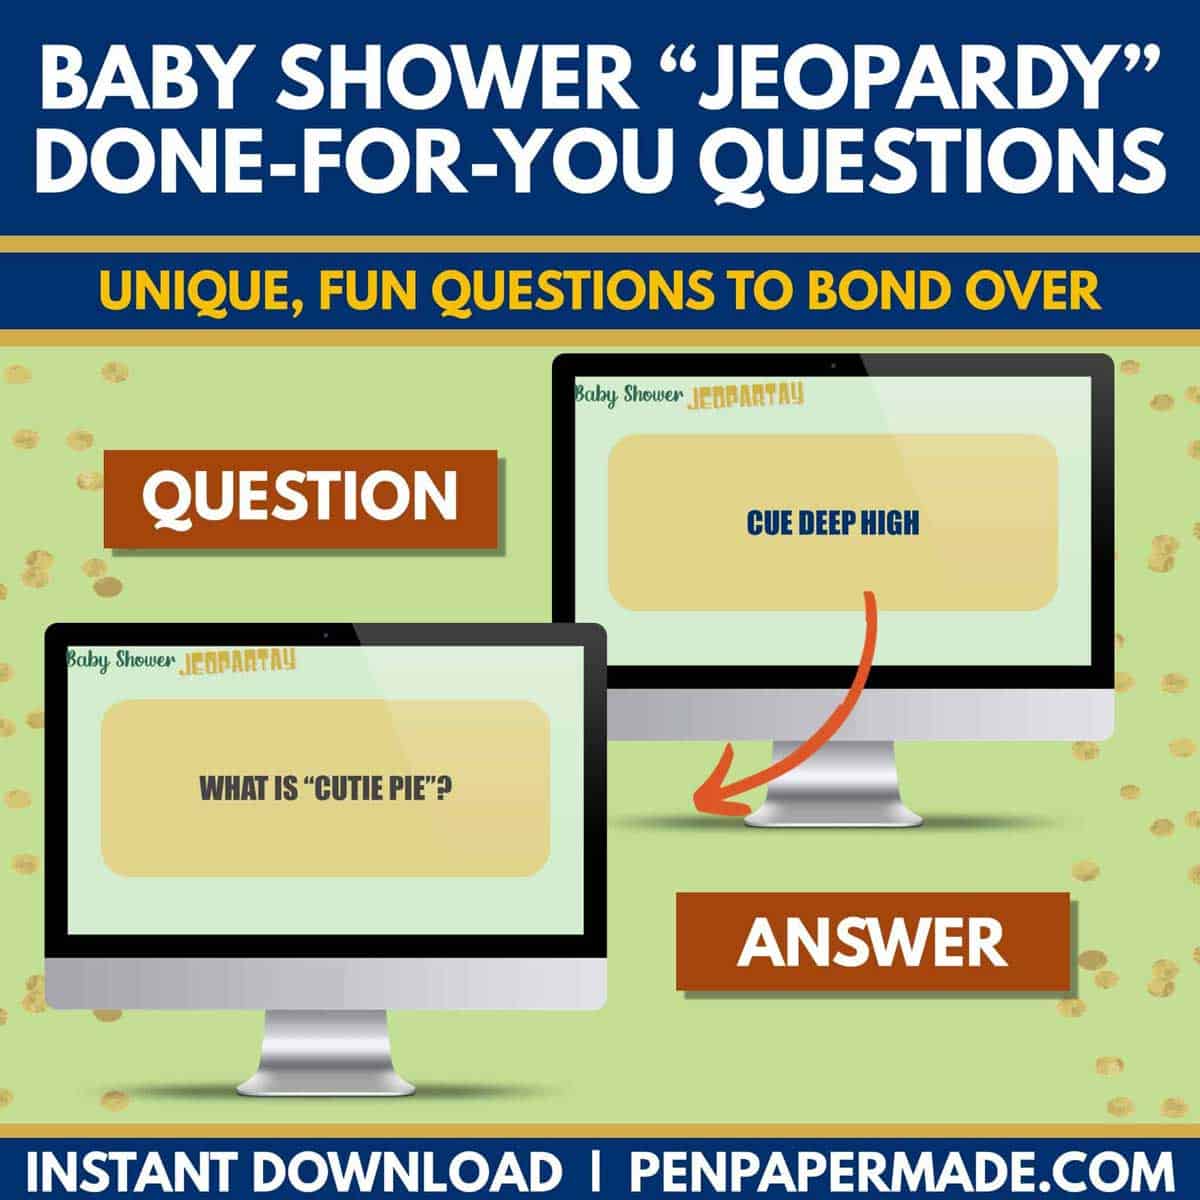 fun green baby shower jeopardy questions like what does cue deep high sound like?